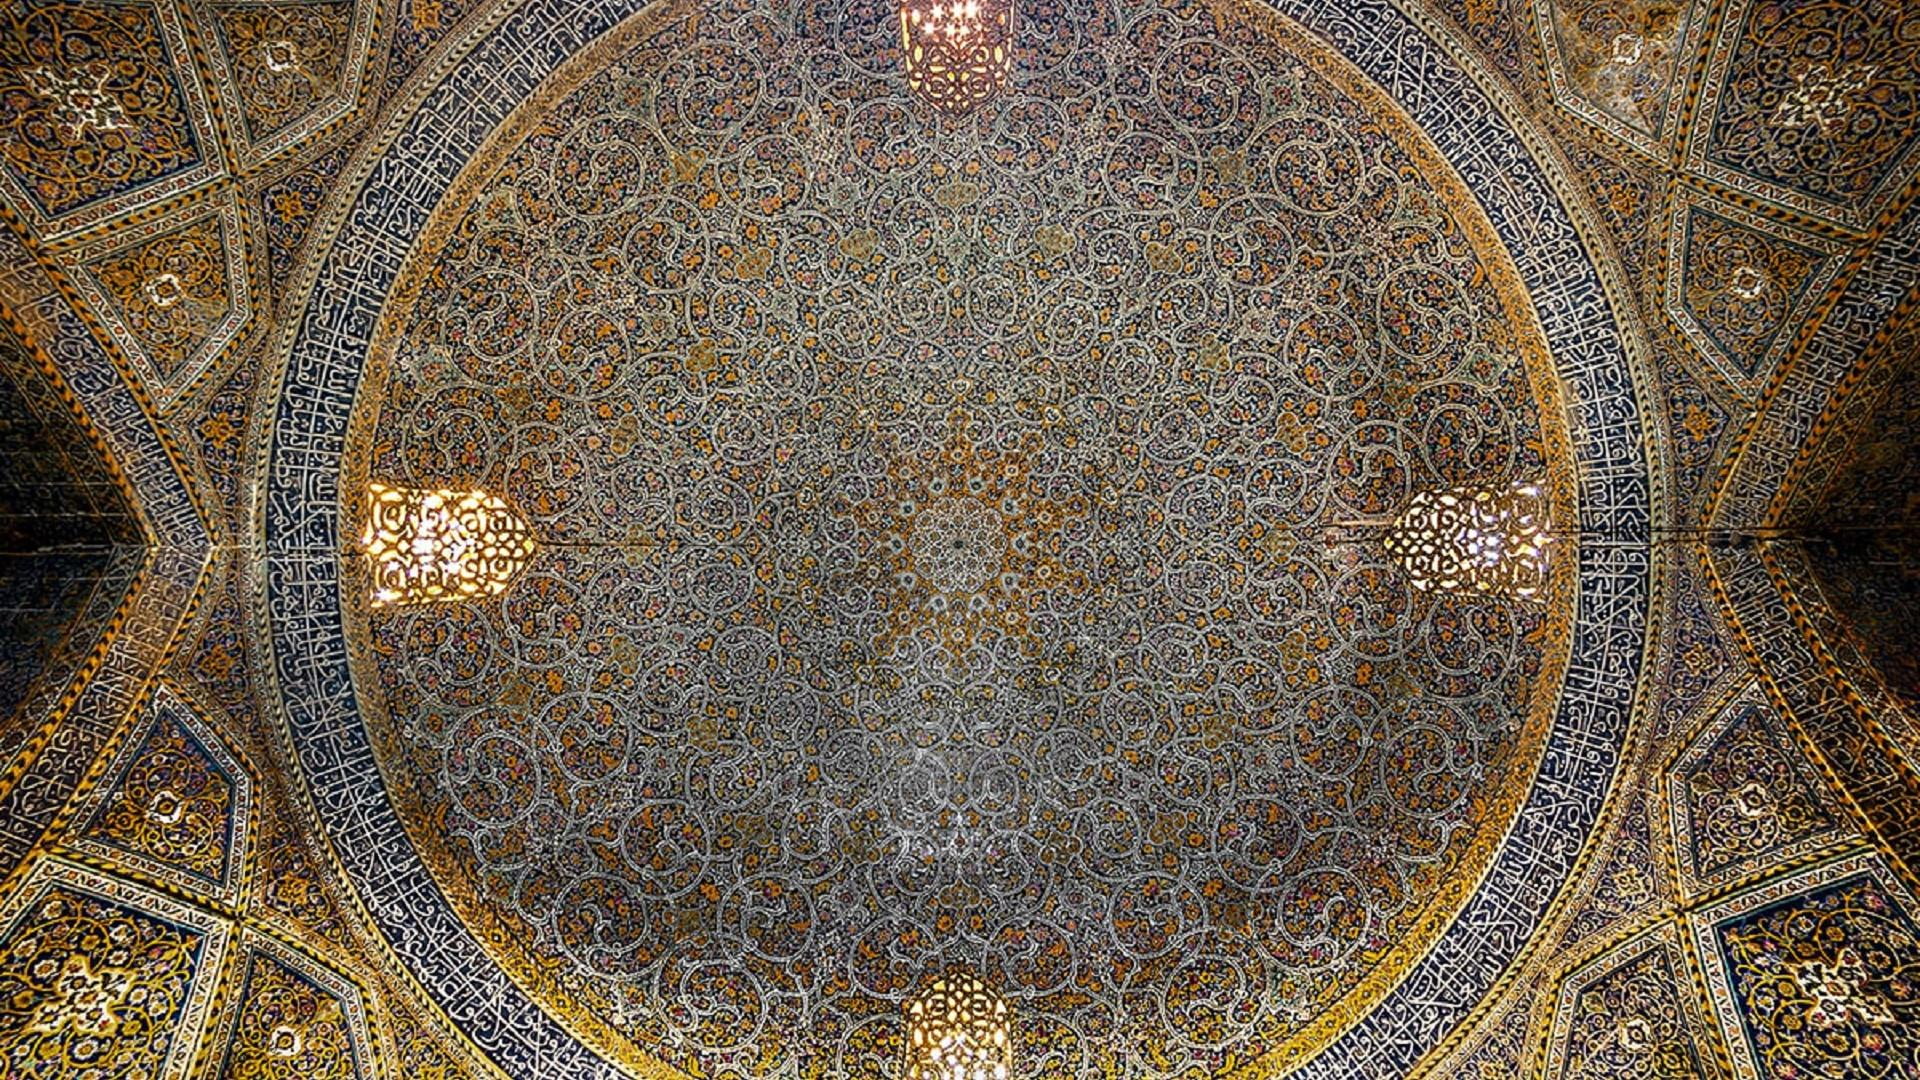 seyyed mosque, iran, isfahan, ceiling, architecture, pattern